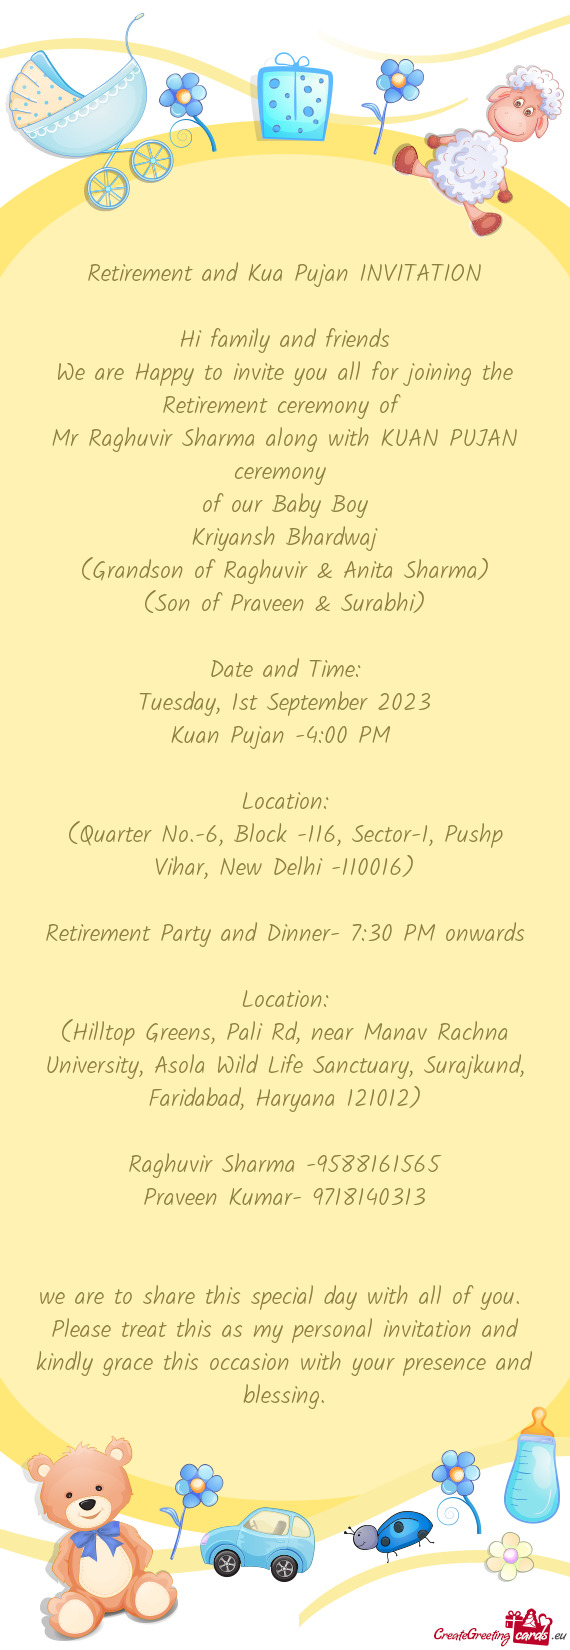 We are Happy to invite you all for joining the Retirement ceremony of